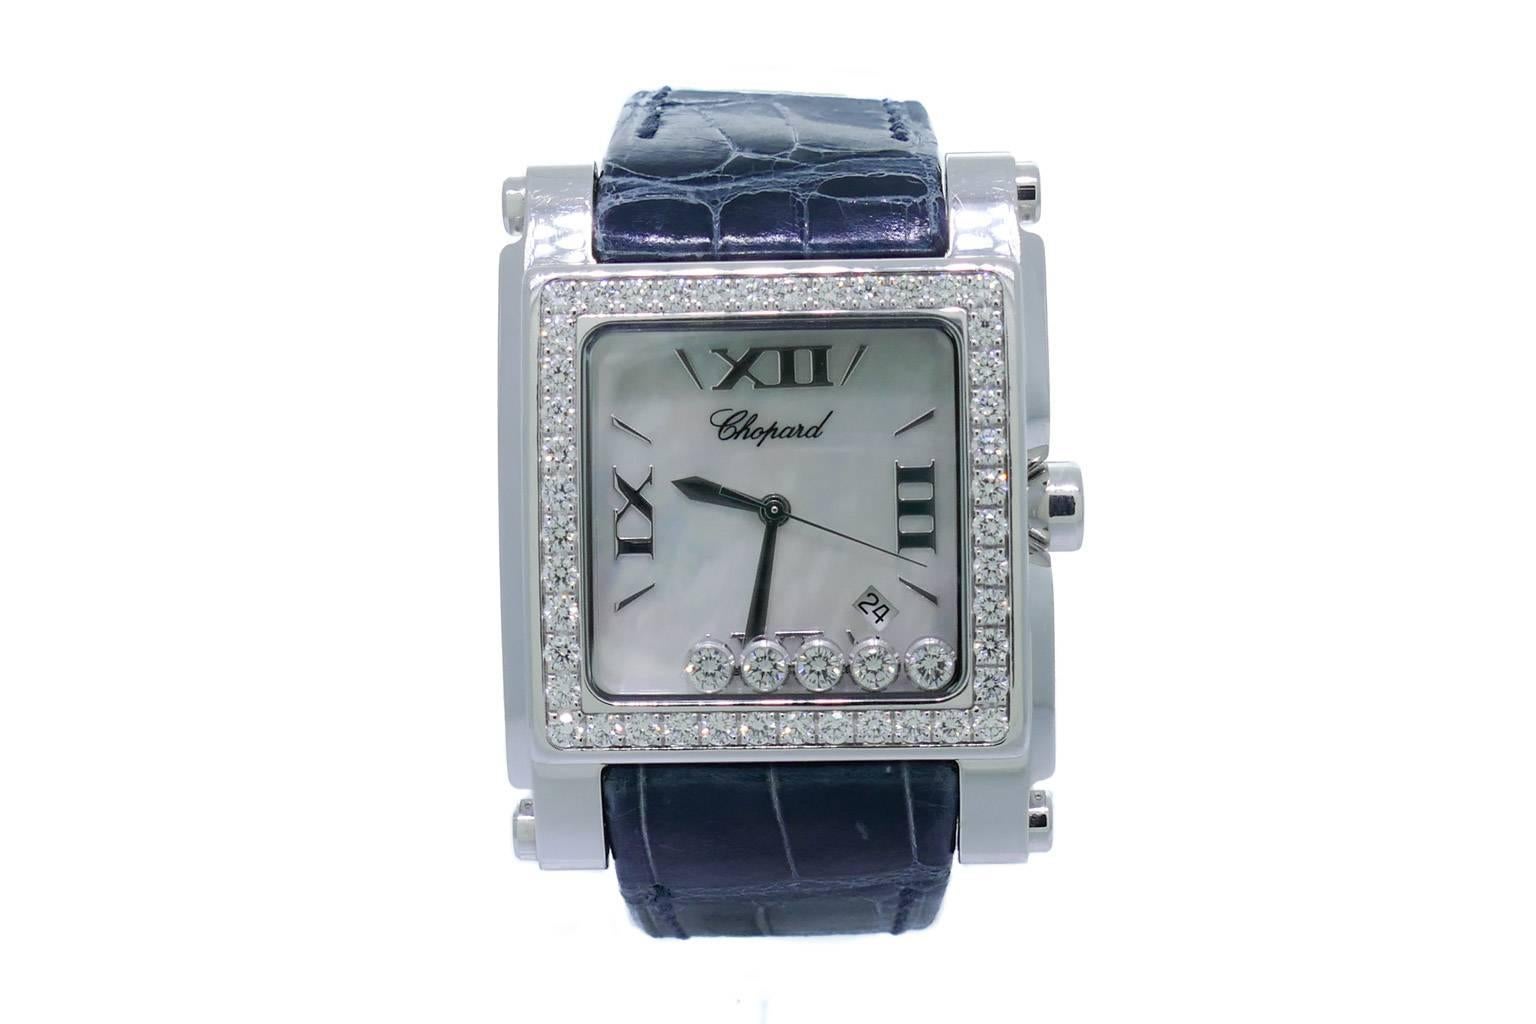 Ladies Chopard Happy Sport XL (35x47mm) Diamond (2.43CT) 18k White Gold Square Shaped Watch W/ Mother of Pearl Dial, Ref 28/3569-20. The Watch is Officially New Old Stock though it Does Have Some Superficial Scratches and Wear to the Strap. The